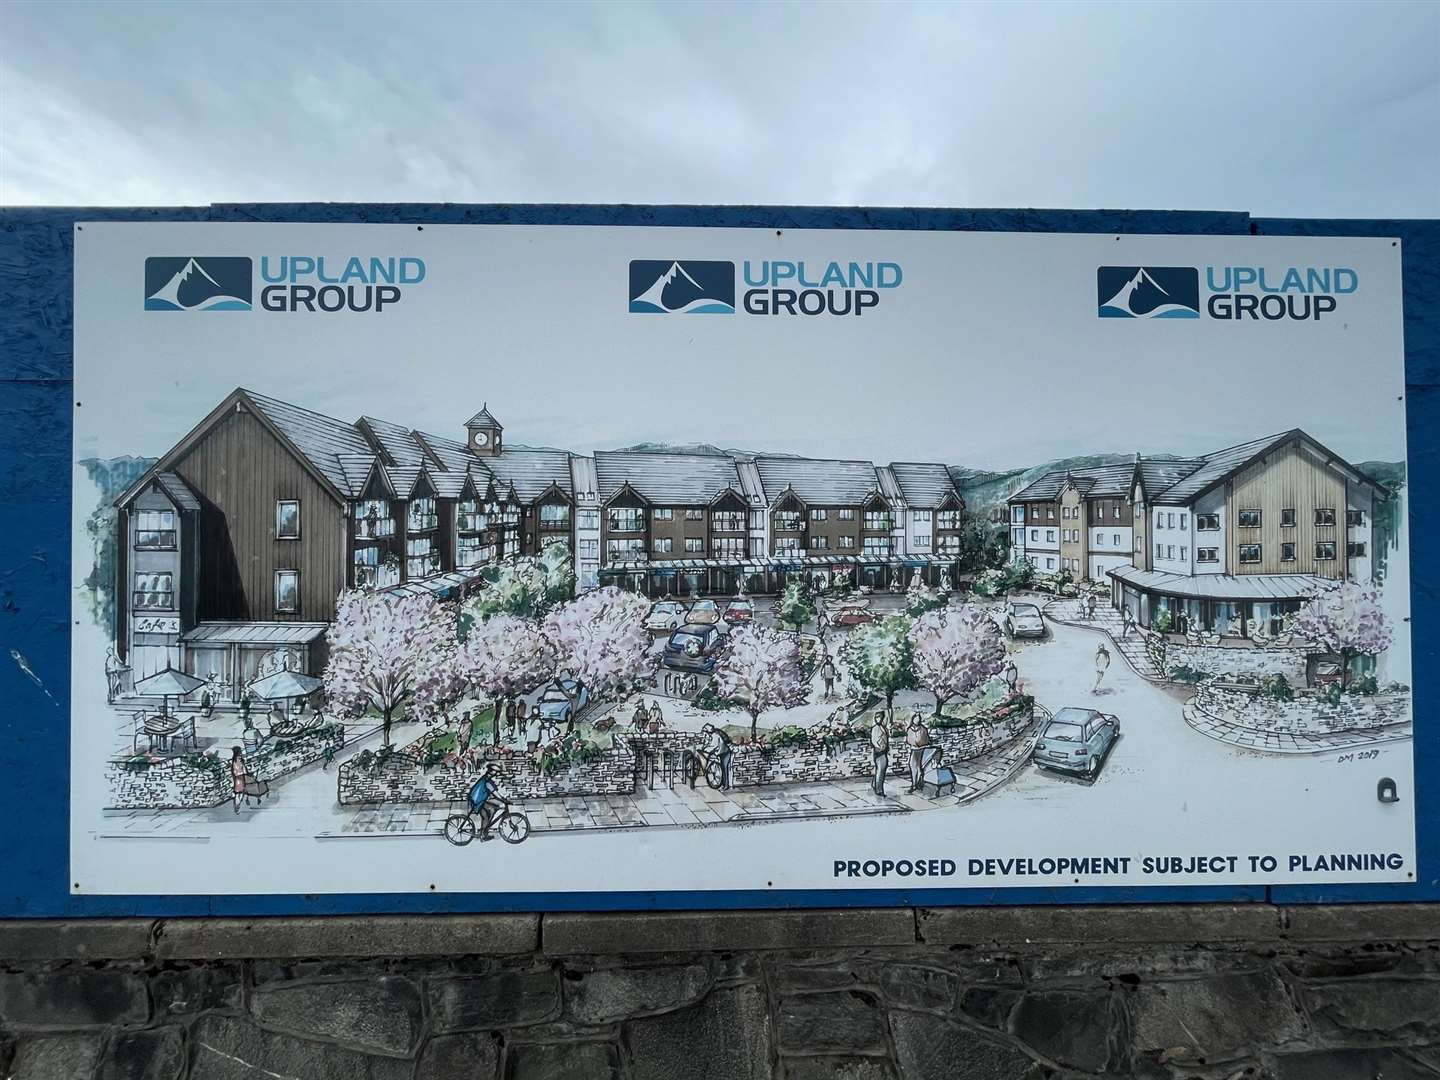 A sign showing a now revised plan for development.